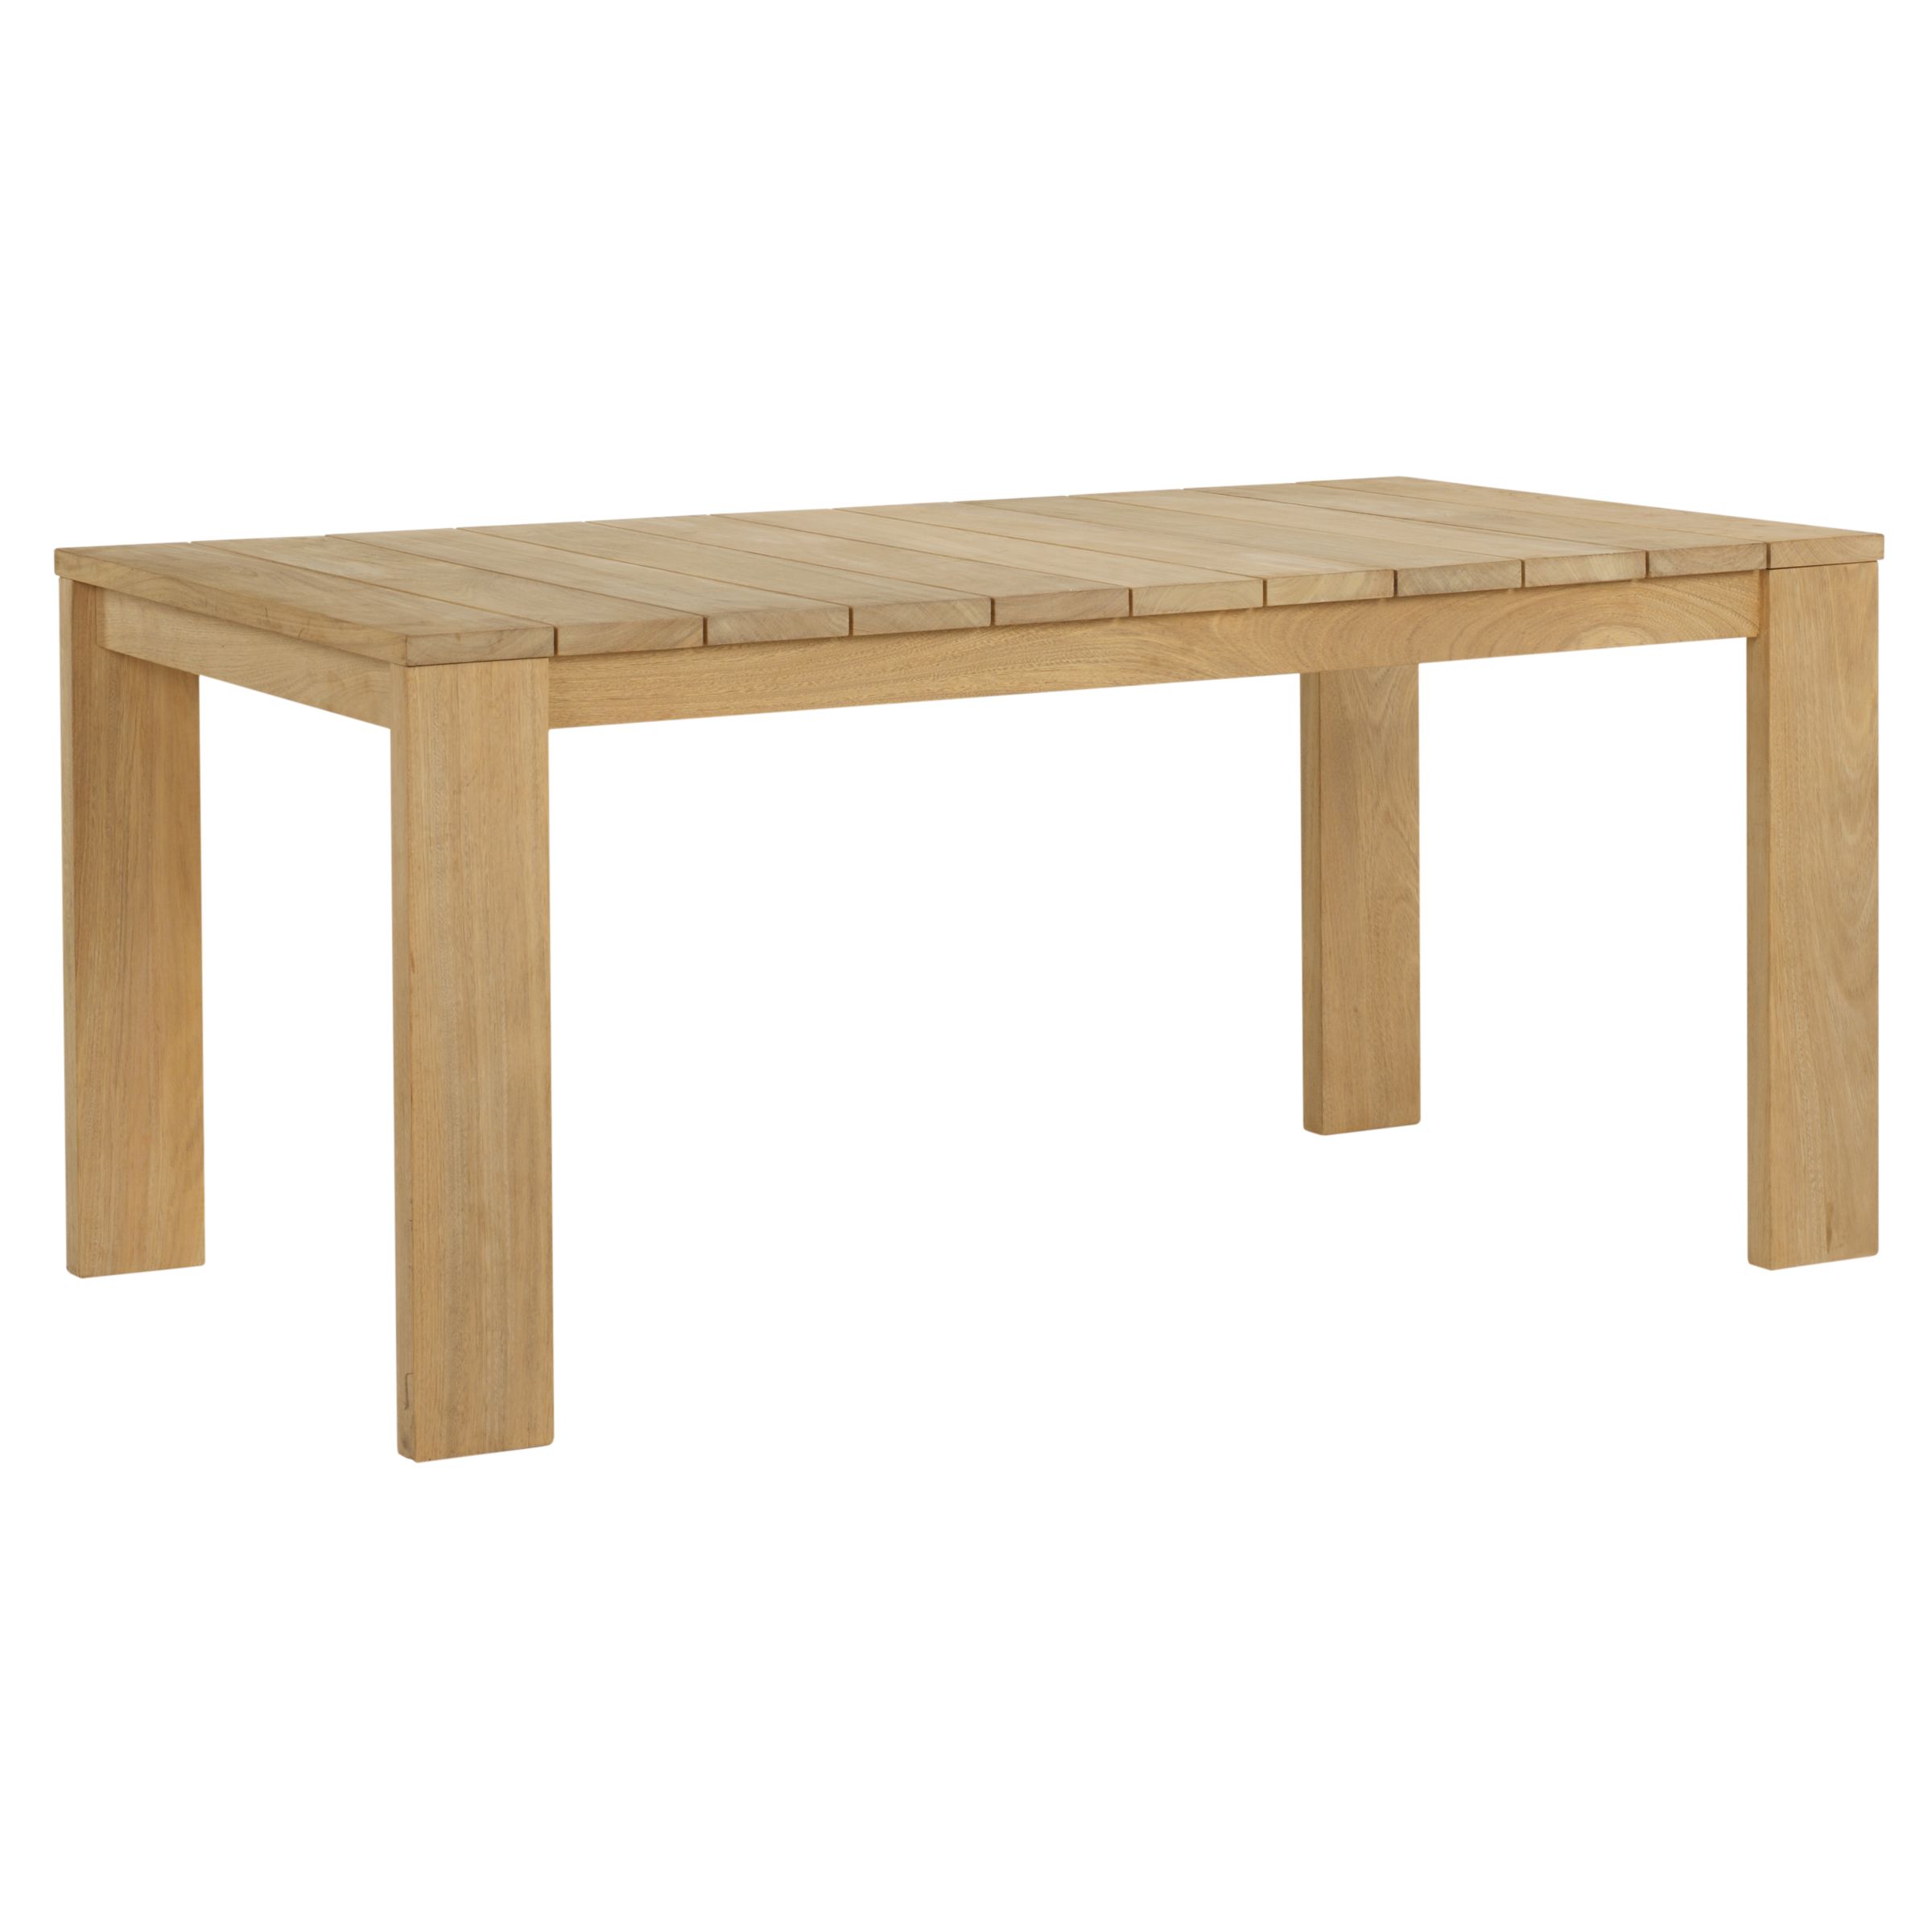 John Lewis Roma 8 Seater Outdoor Dining Table,